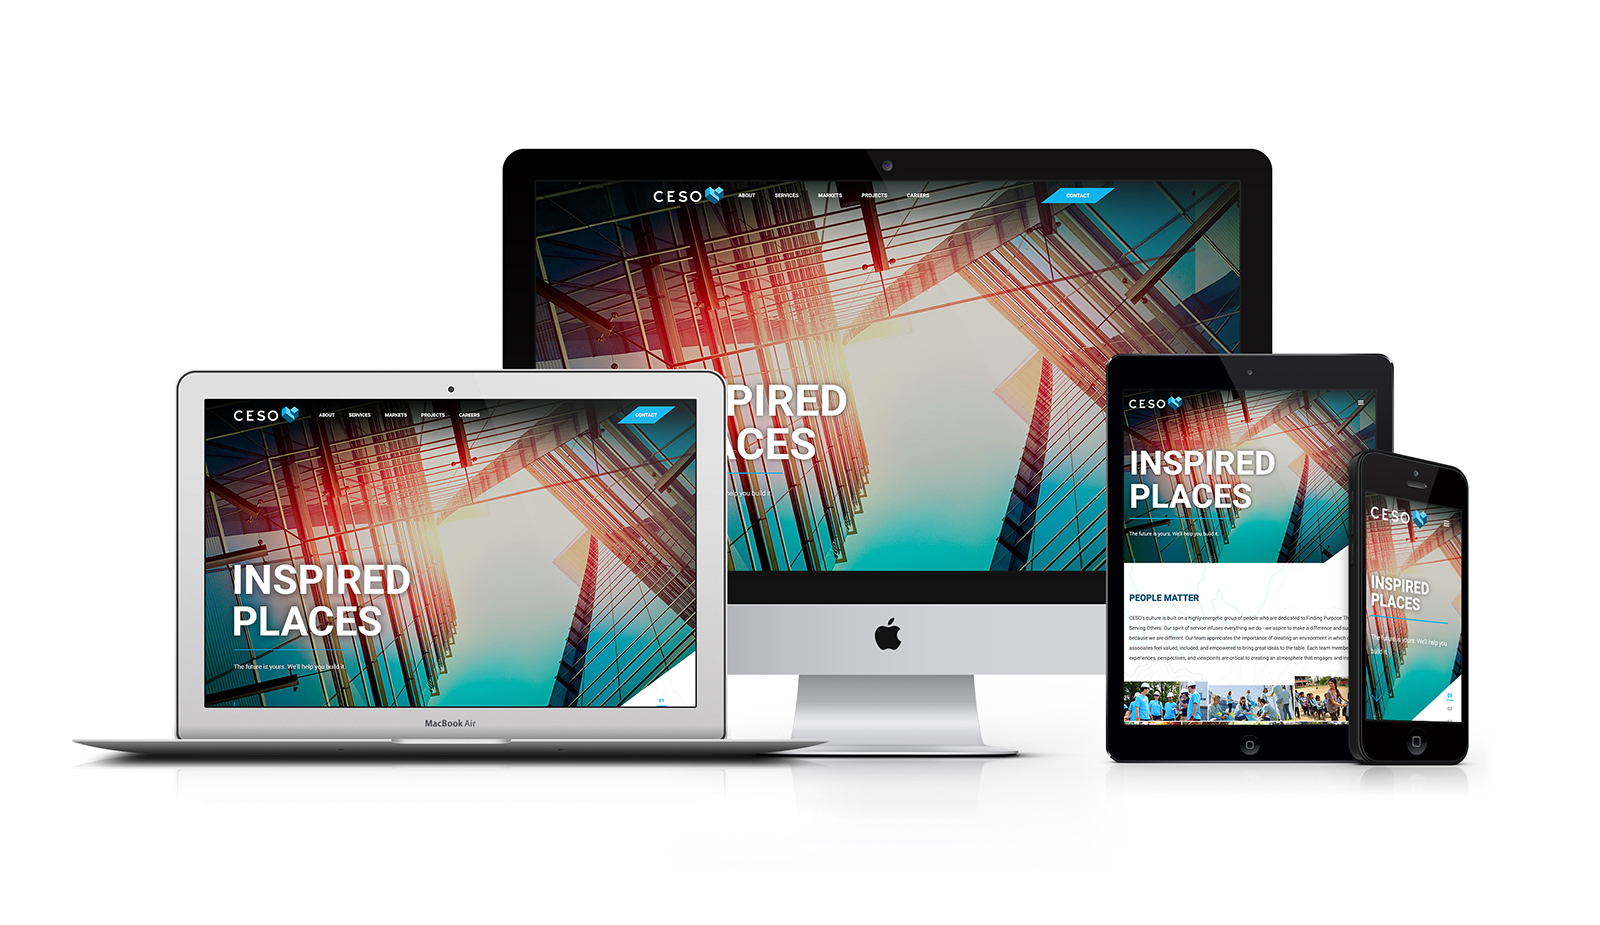 CESO Responsive Website Design powered by CraftCMS